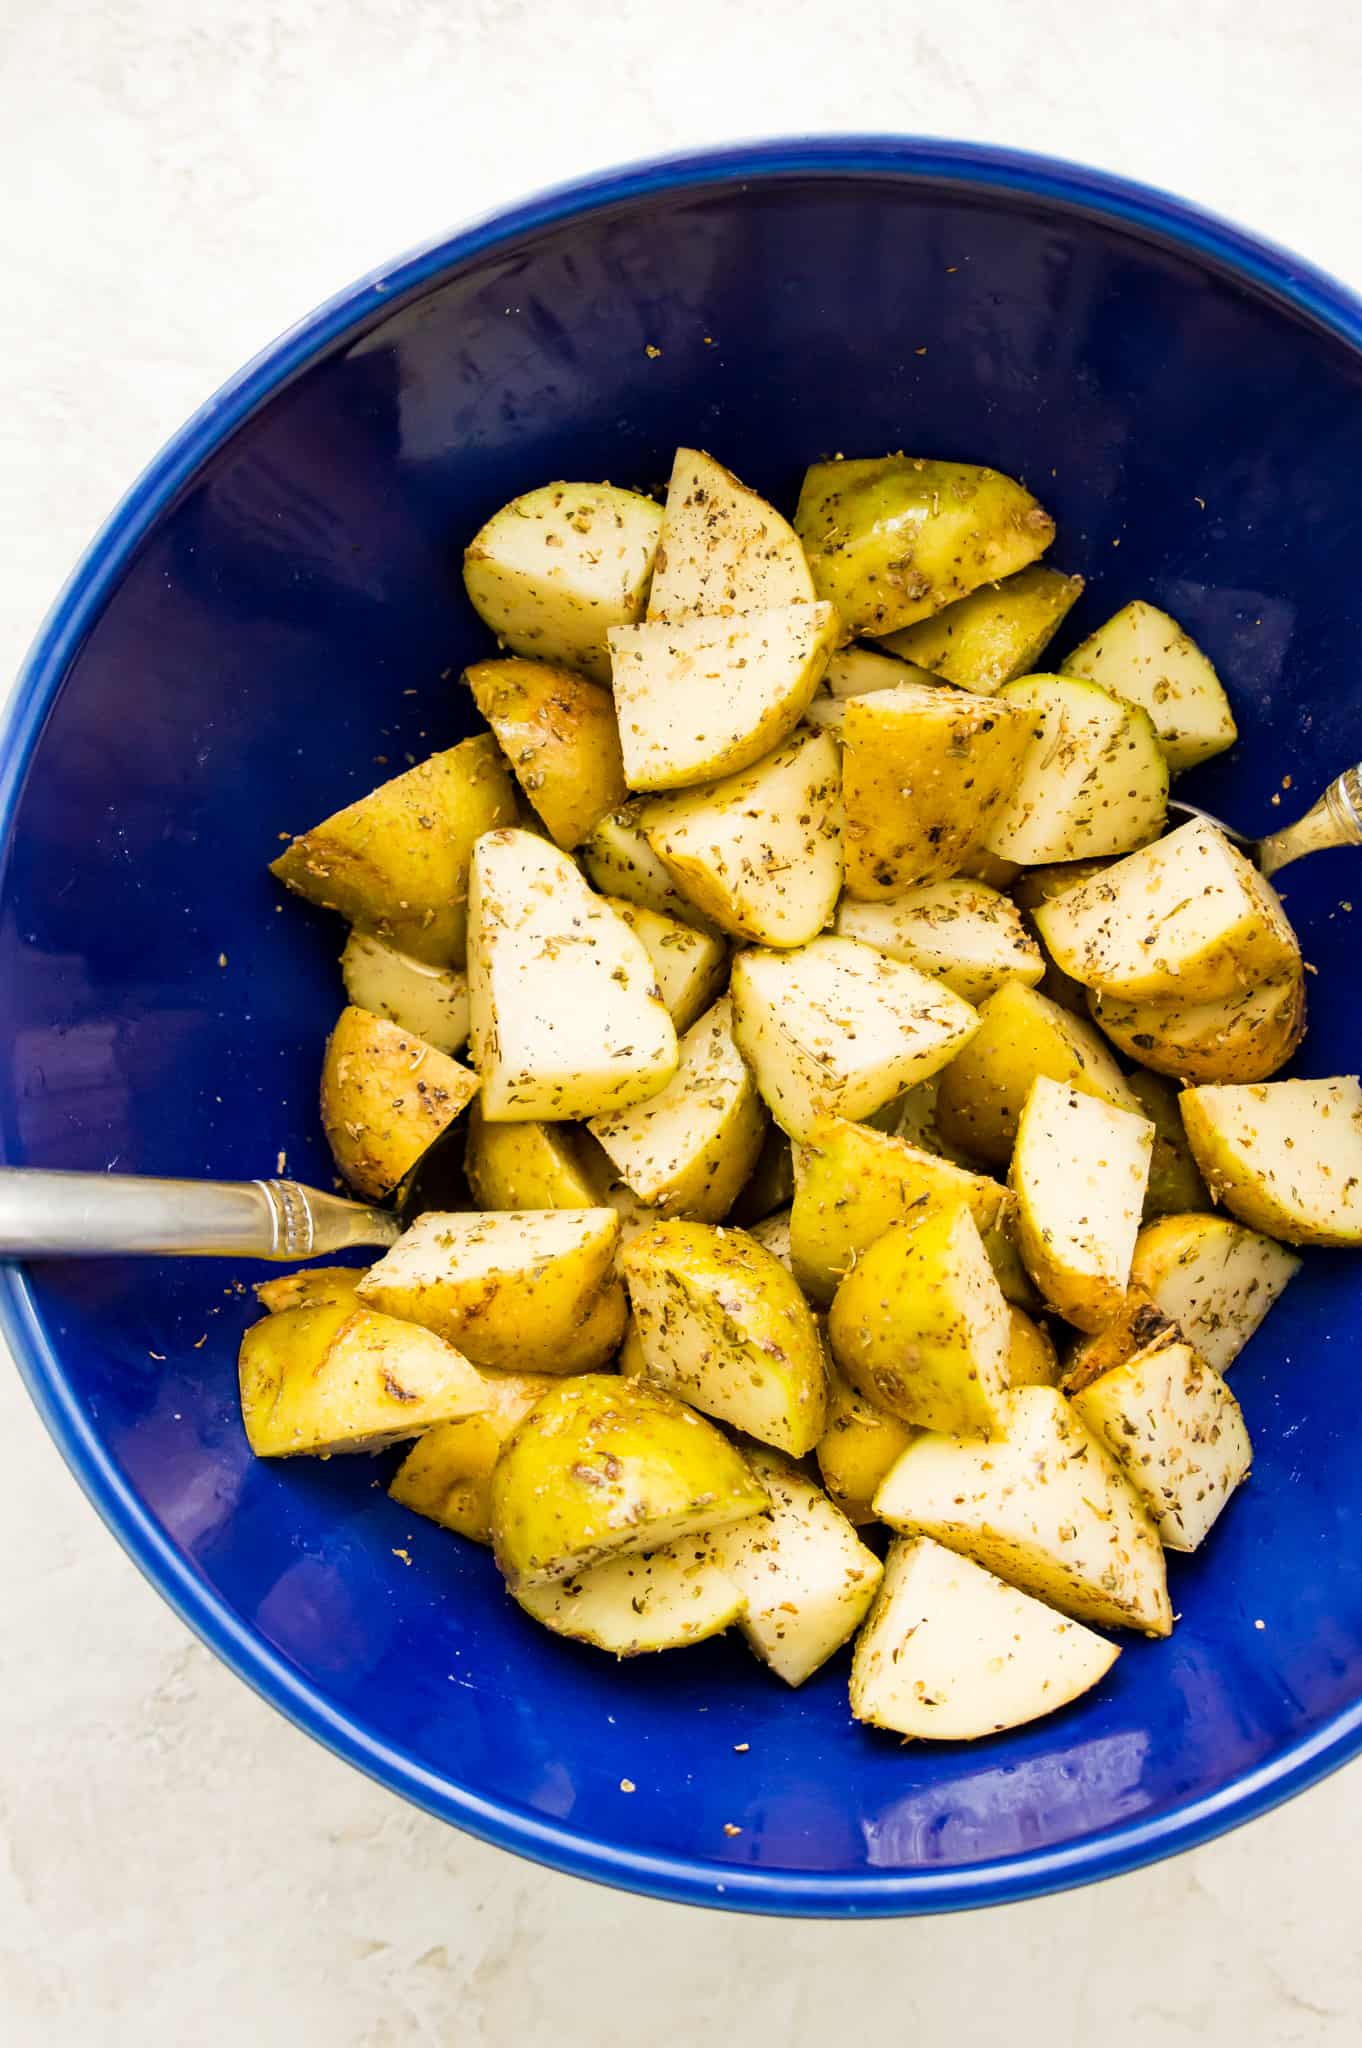 A bowl of raw, chopped potatoes with seasoning on them